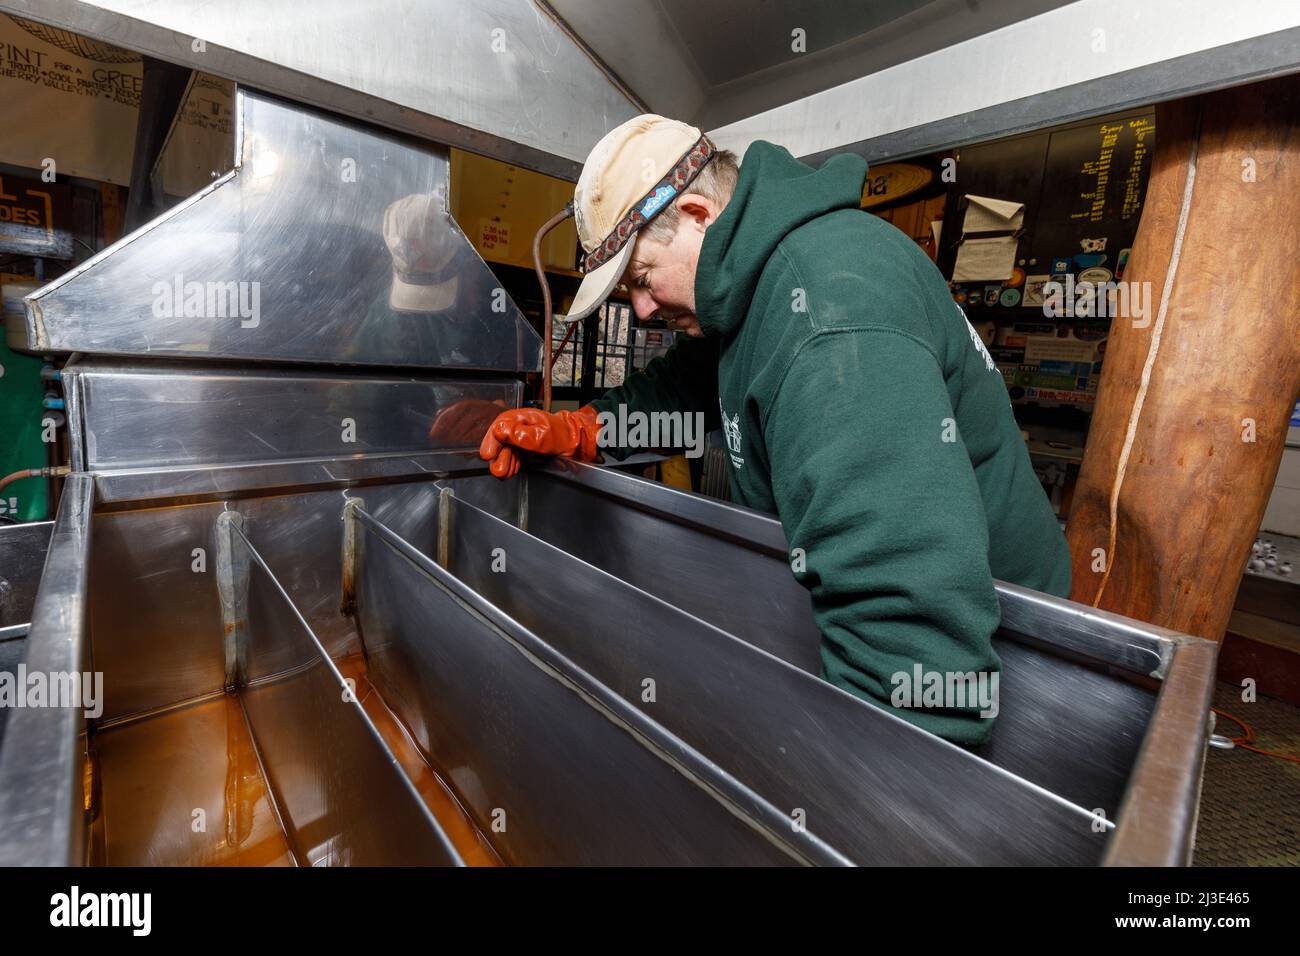 Making maple syrup: Man cleans 'sugar sand' out of his evaporator. Cherry Valley, Otsego County, New York State. Stock Photo